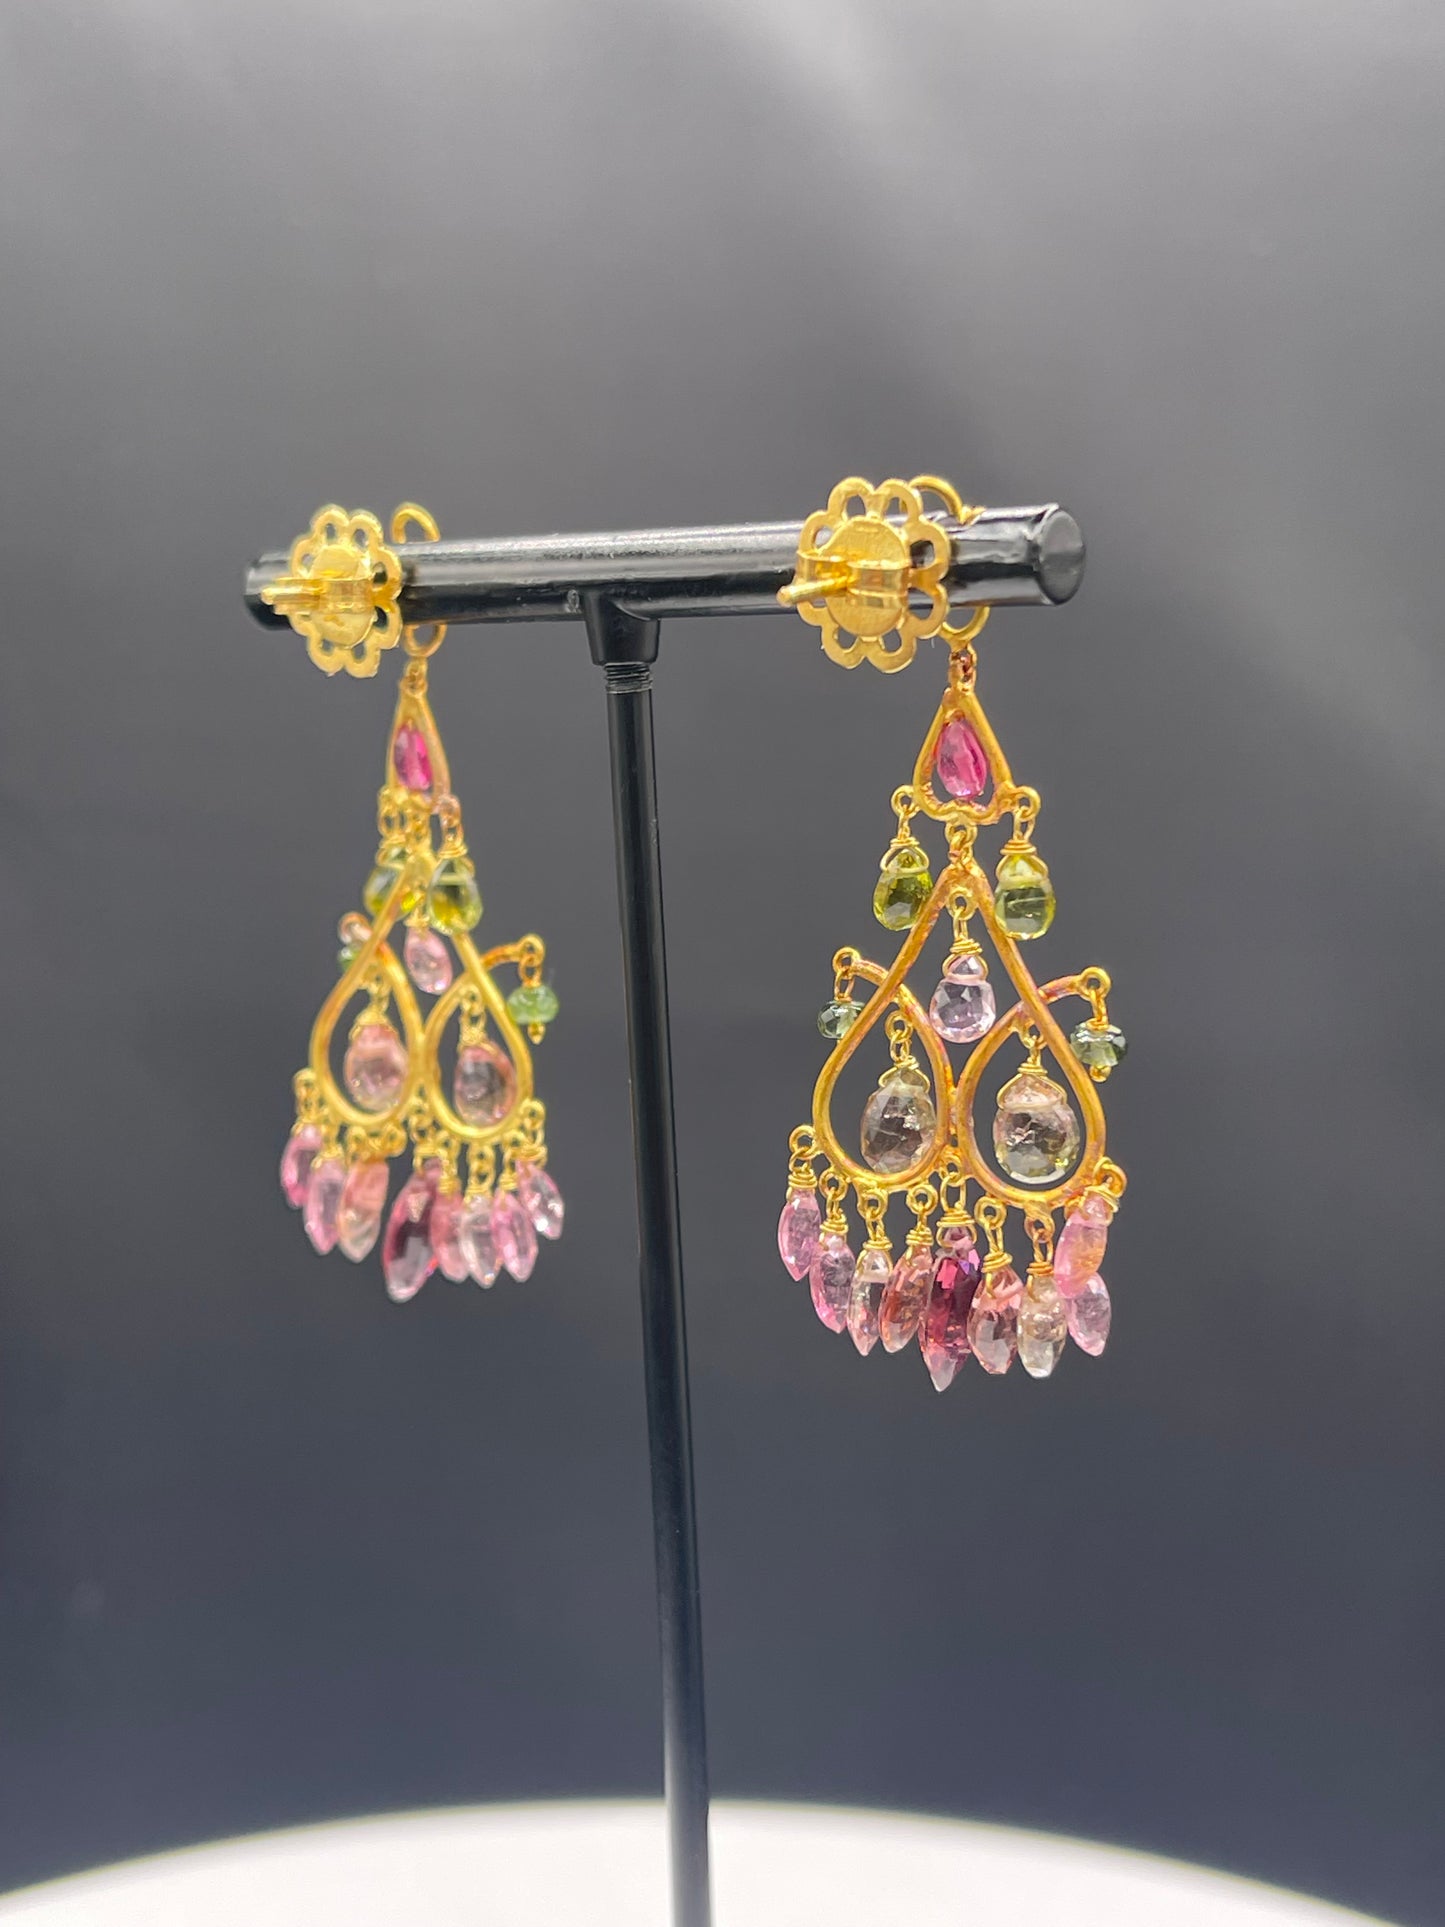 Handmade Multi-Color Tourmaline Briolette Cut 18k Yellow Gold Dangle Earrings - 2 Inch, 8 Grams, One of a Kind